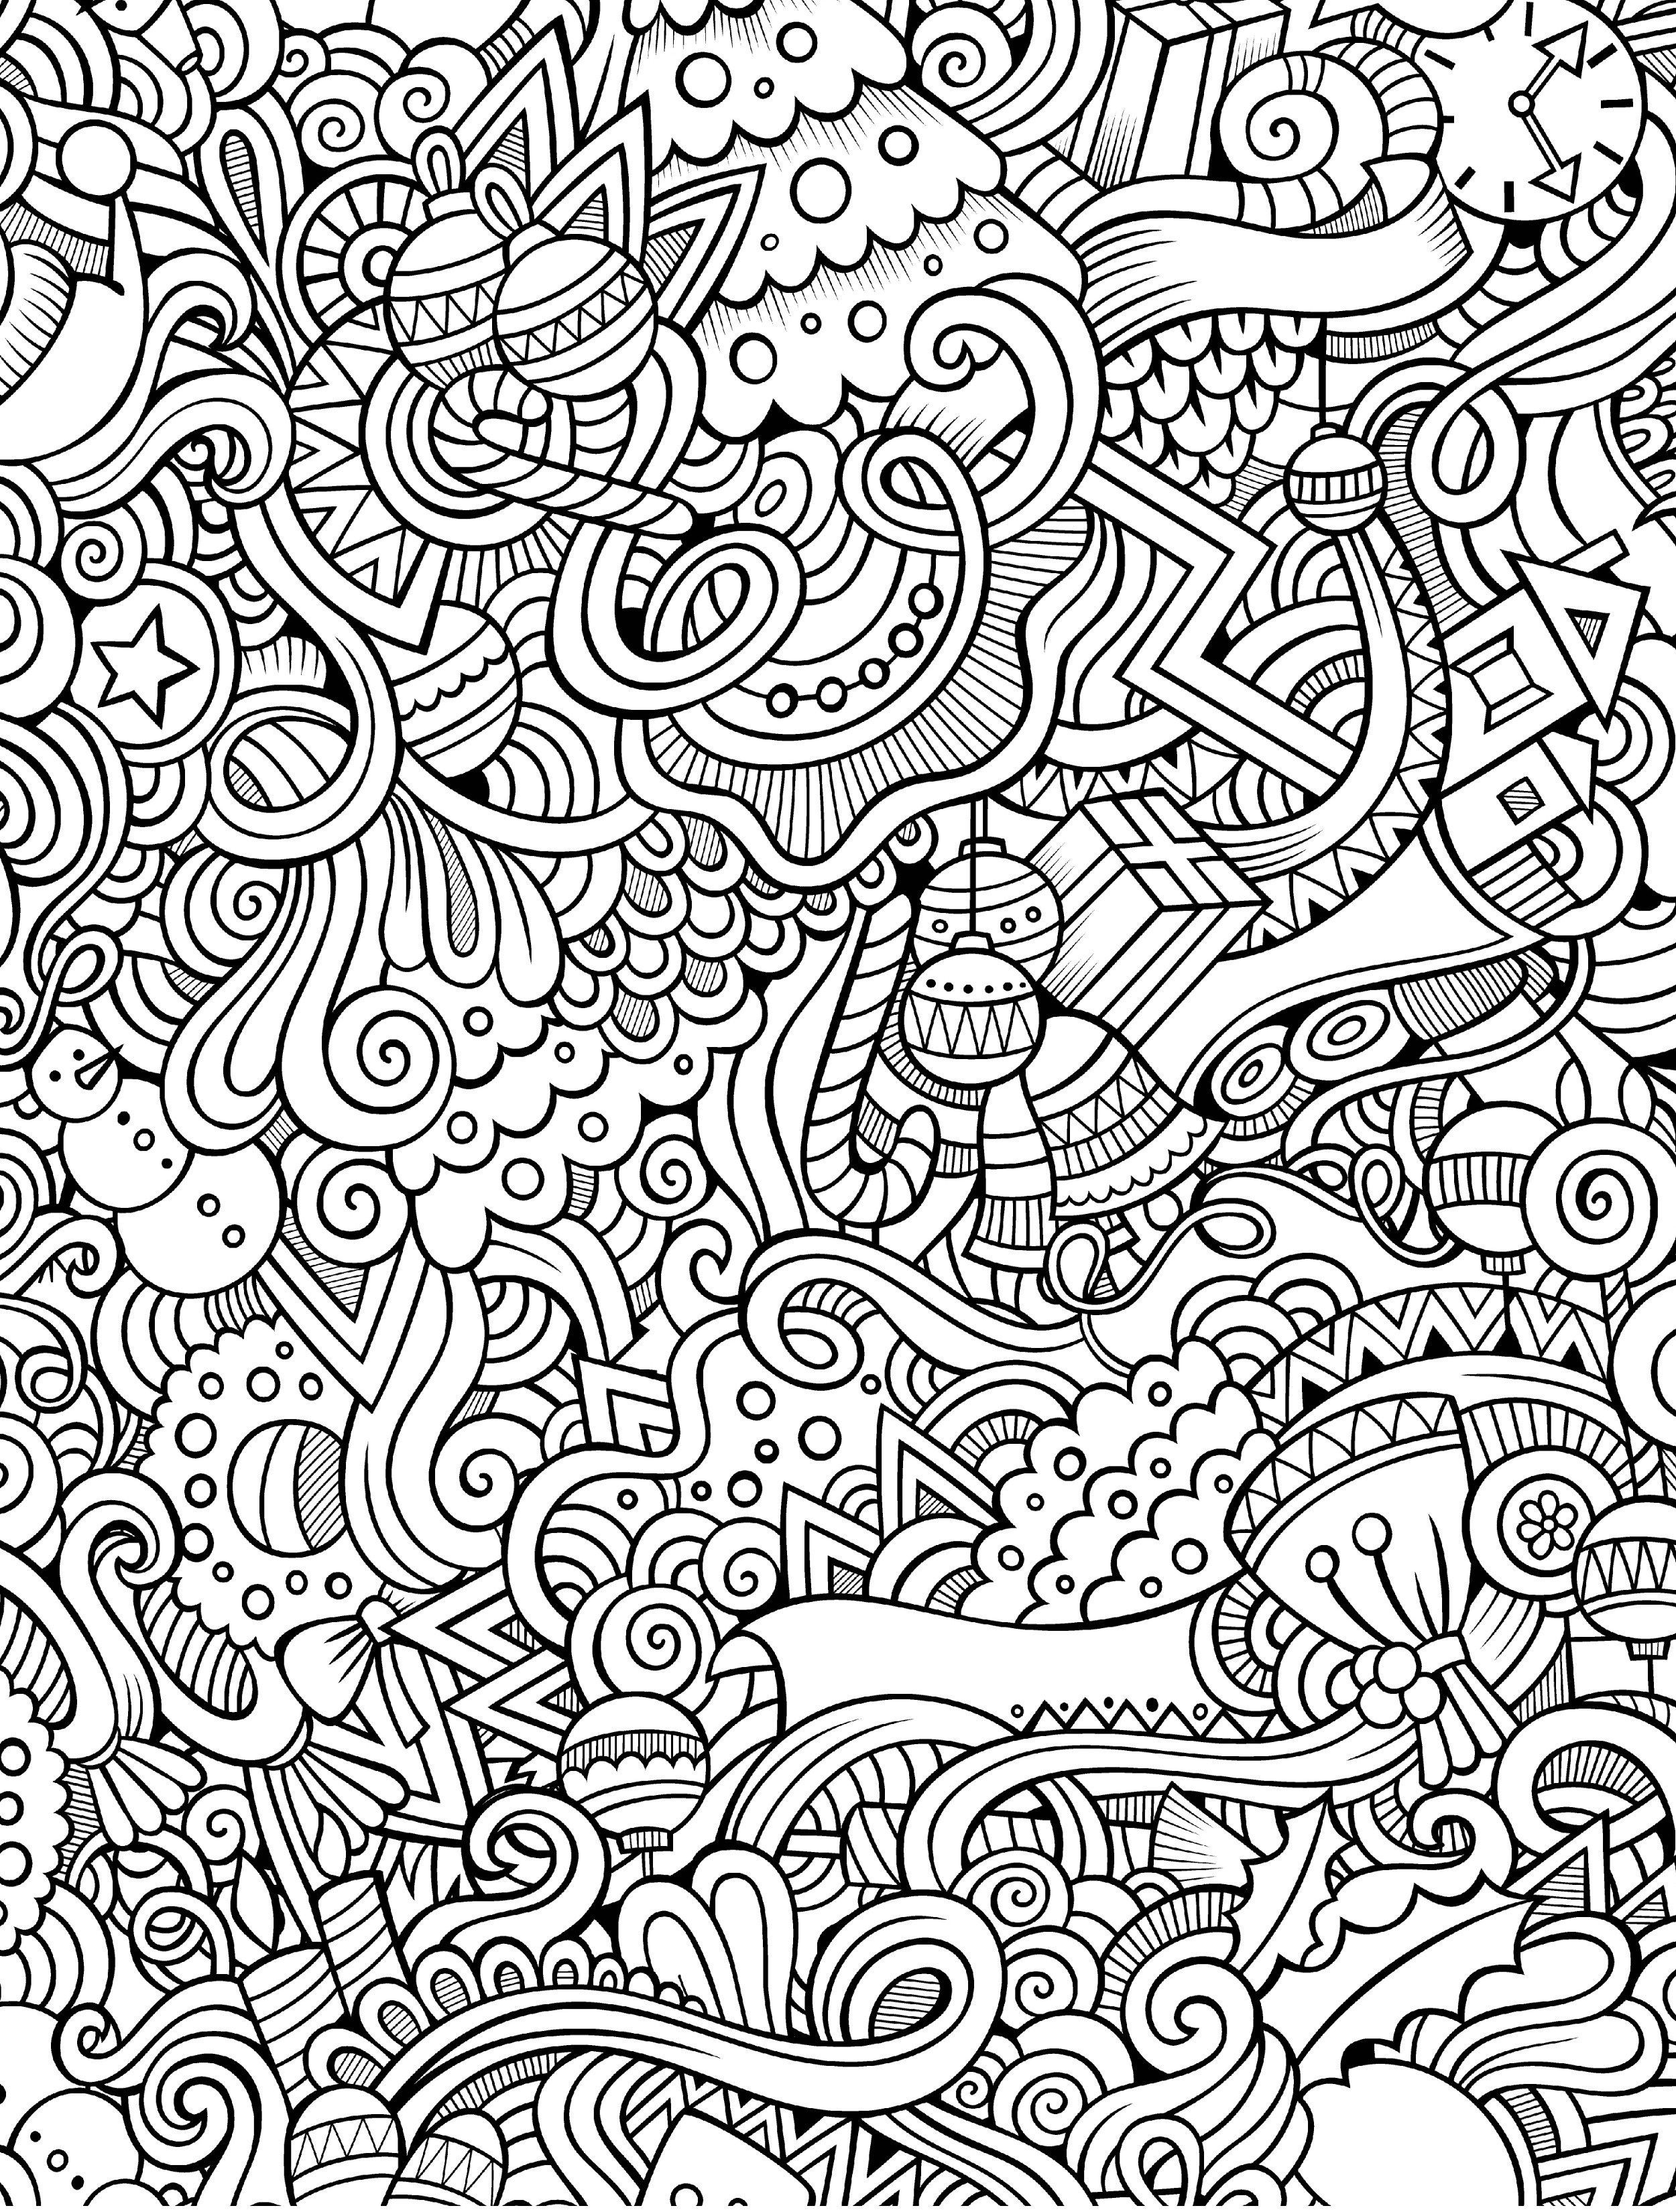 Printable Coloring Pages For Adults Patterns
 10 Free Printable Holiday Adult Coloring Pages